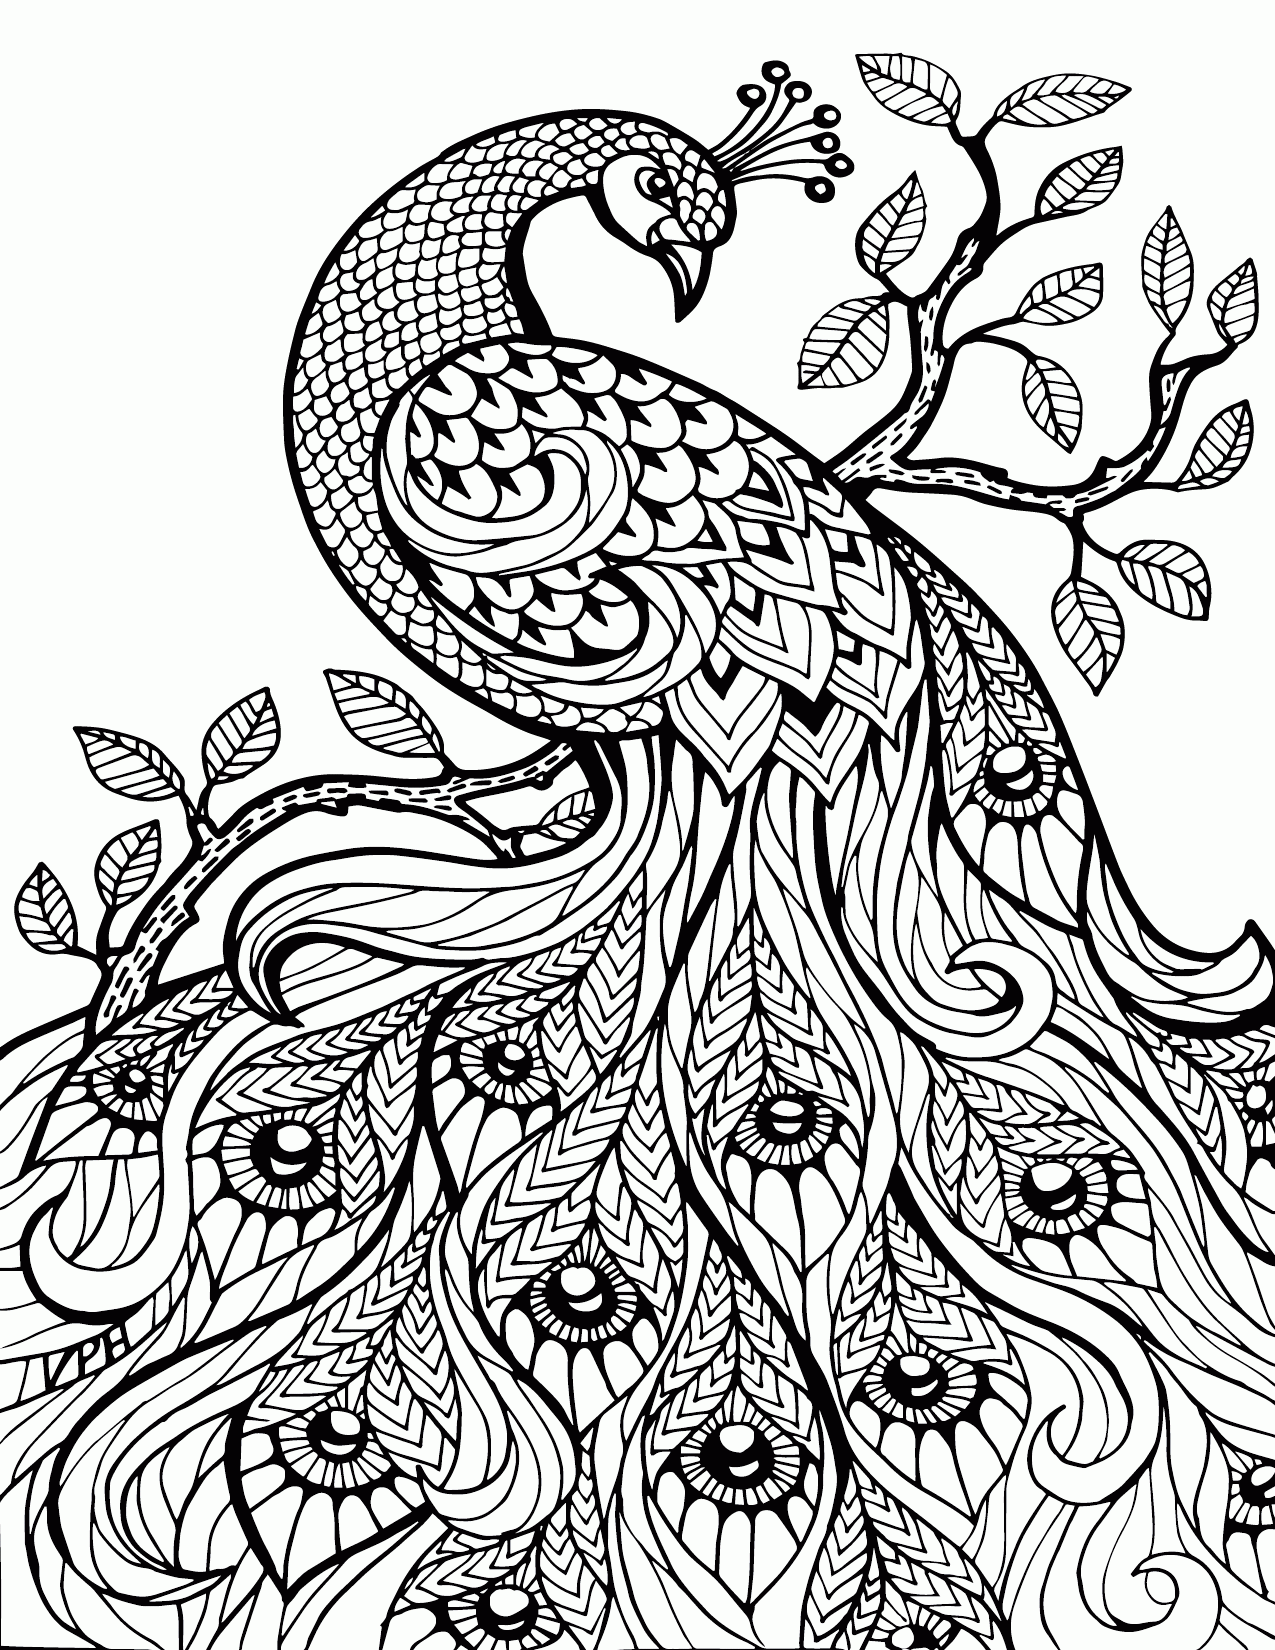 Cool Animal Coloring Pages   Coloring Home